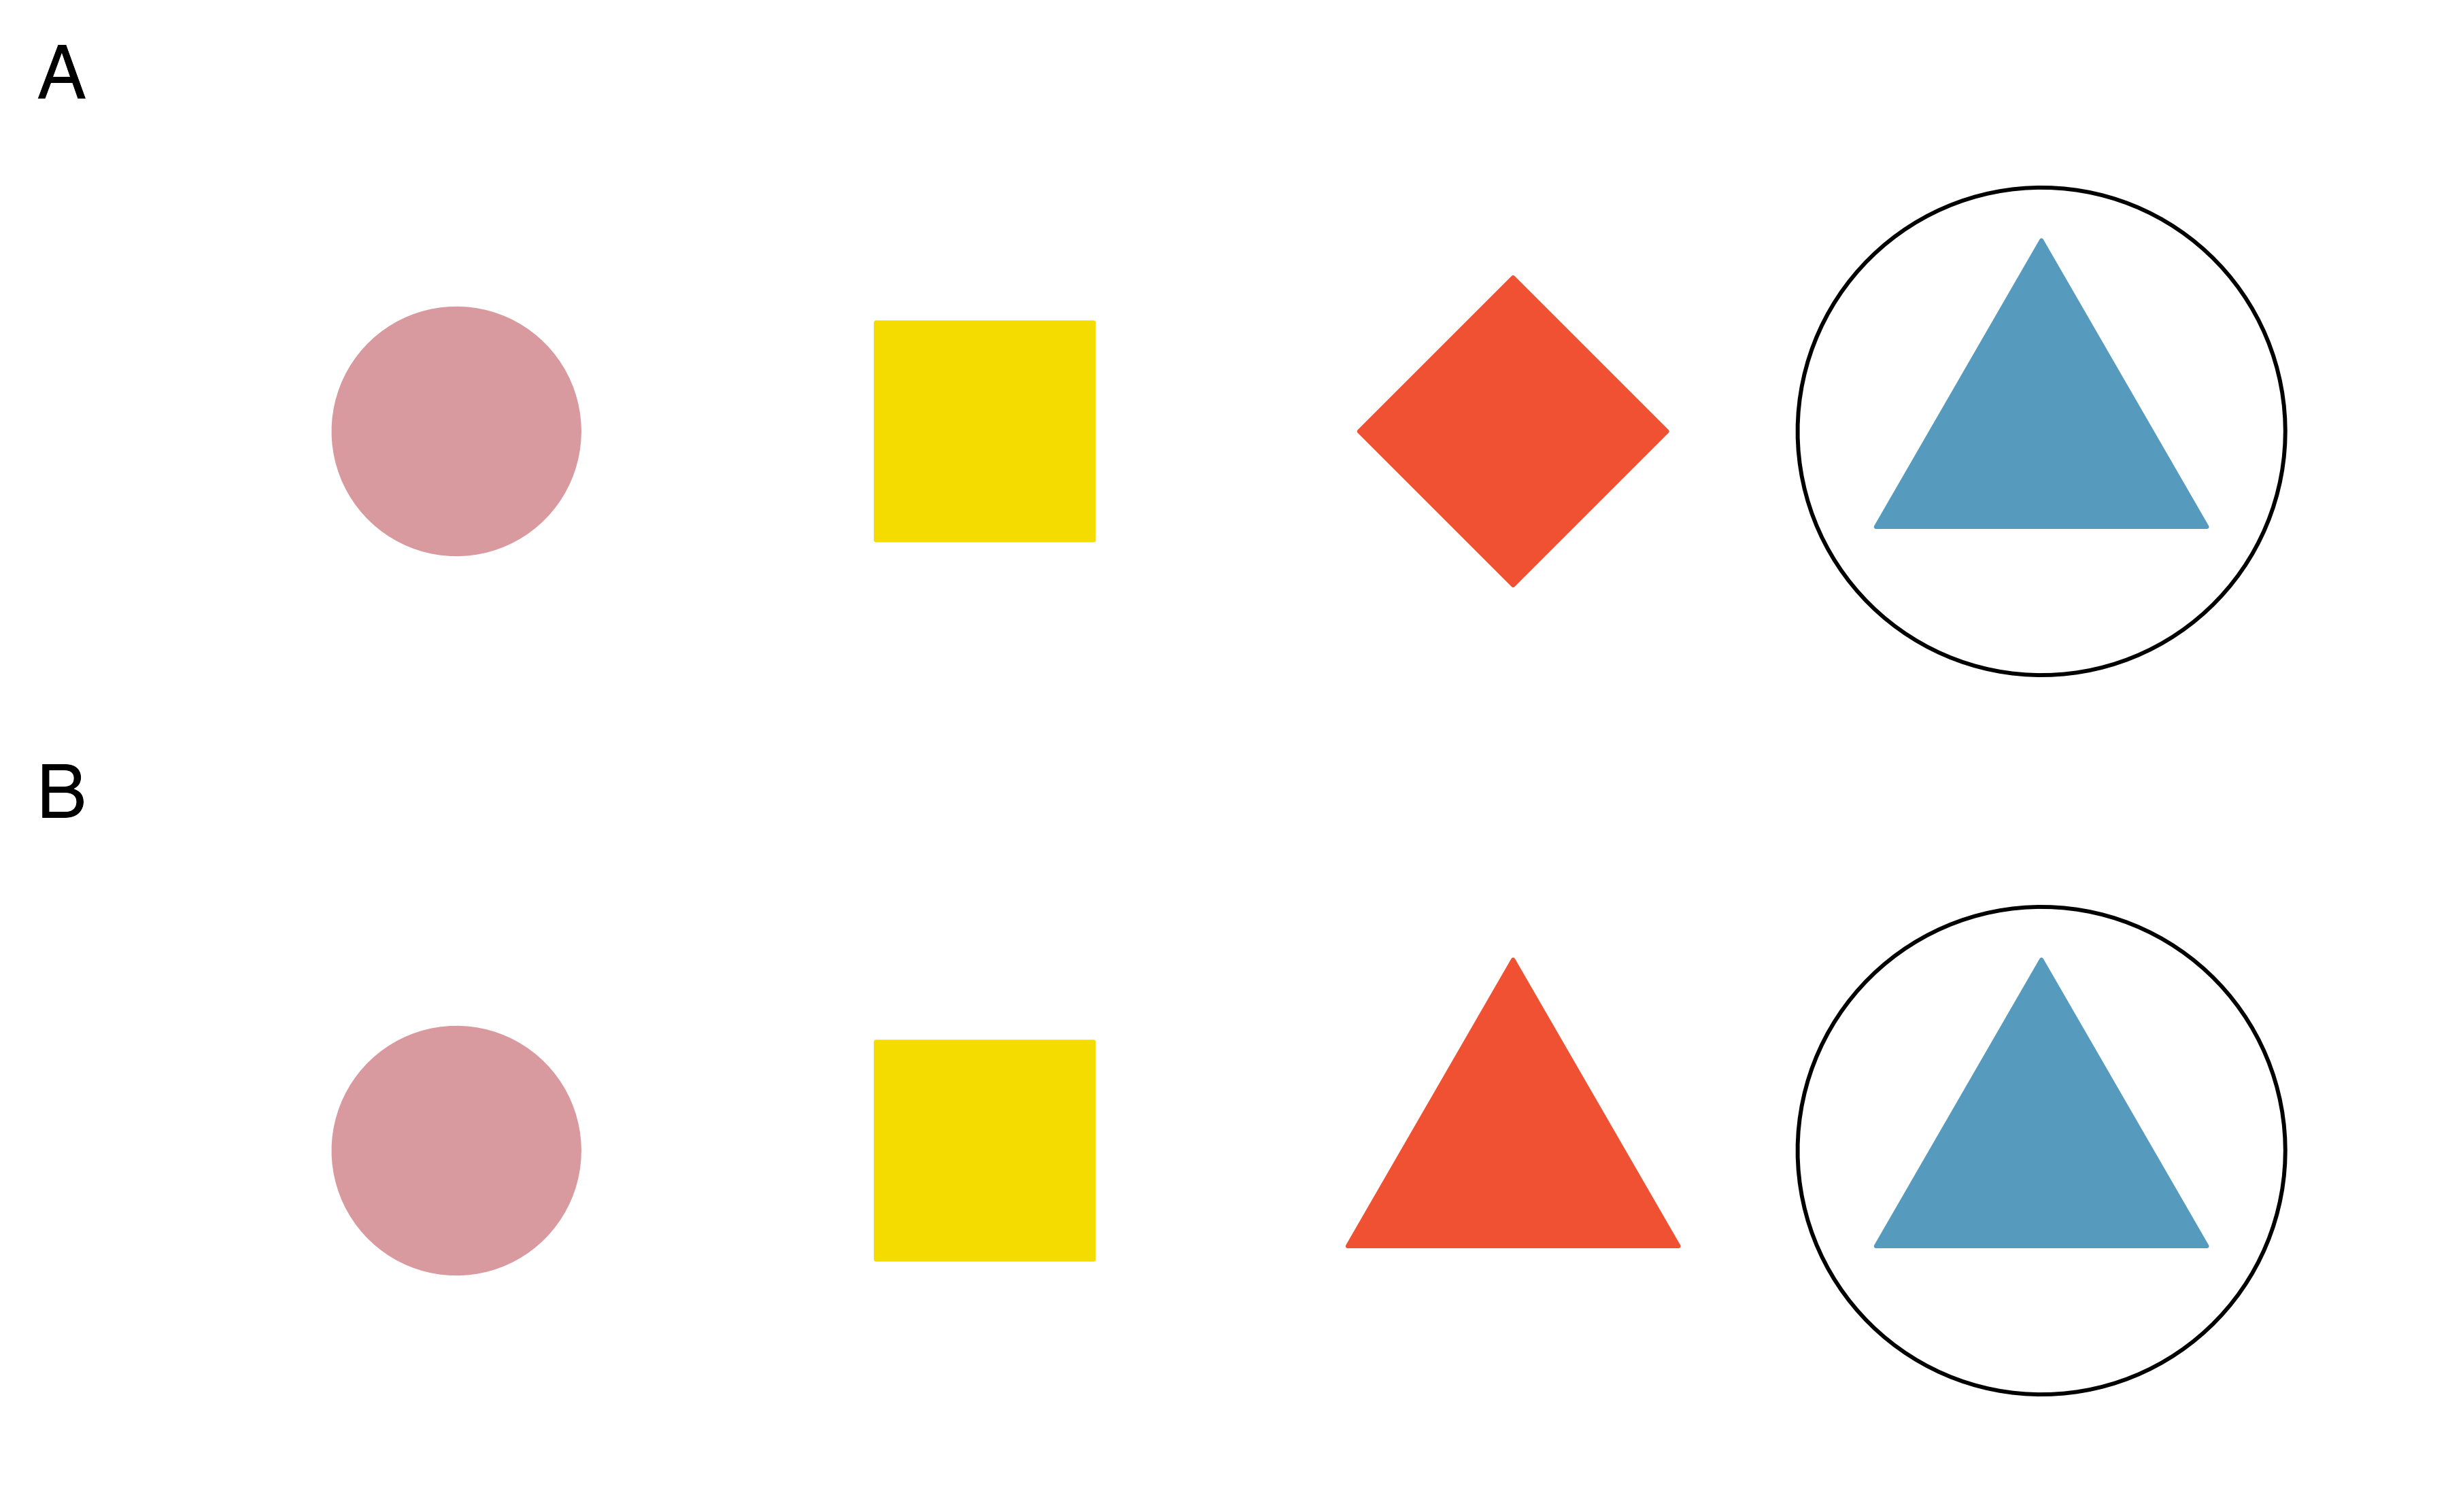 Four shapes are presented twice.  In A (the top presentation) the shapes and colors are all different: pink circle, yellow square, red diamond, blue triangle.  In B (the bottom presentation) the colors are all different but the traingle shape is repeated: pink circle, yellow square, red triangle, blue triangle.  In each of the two presentations the blue triangle is circled.